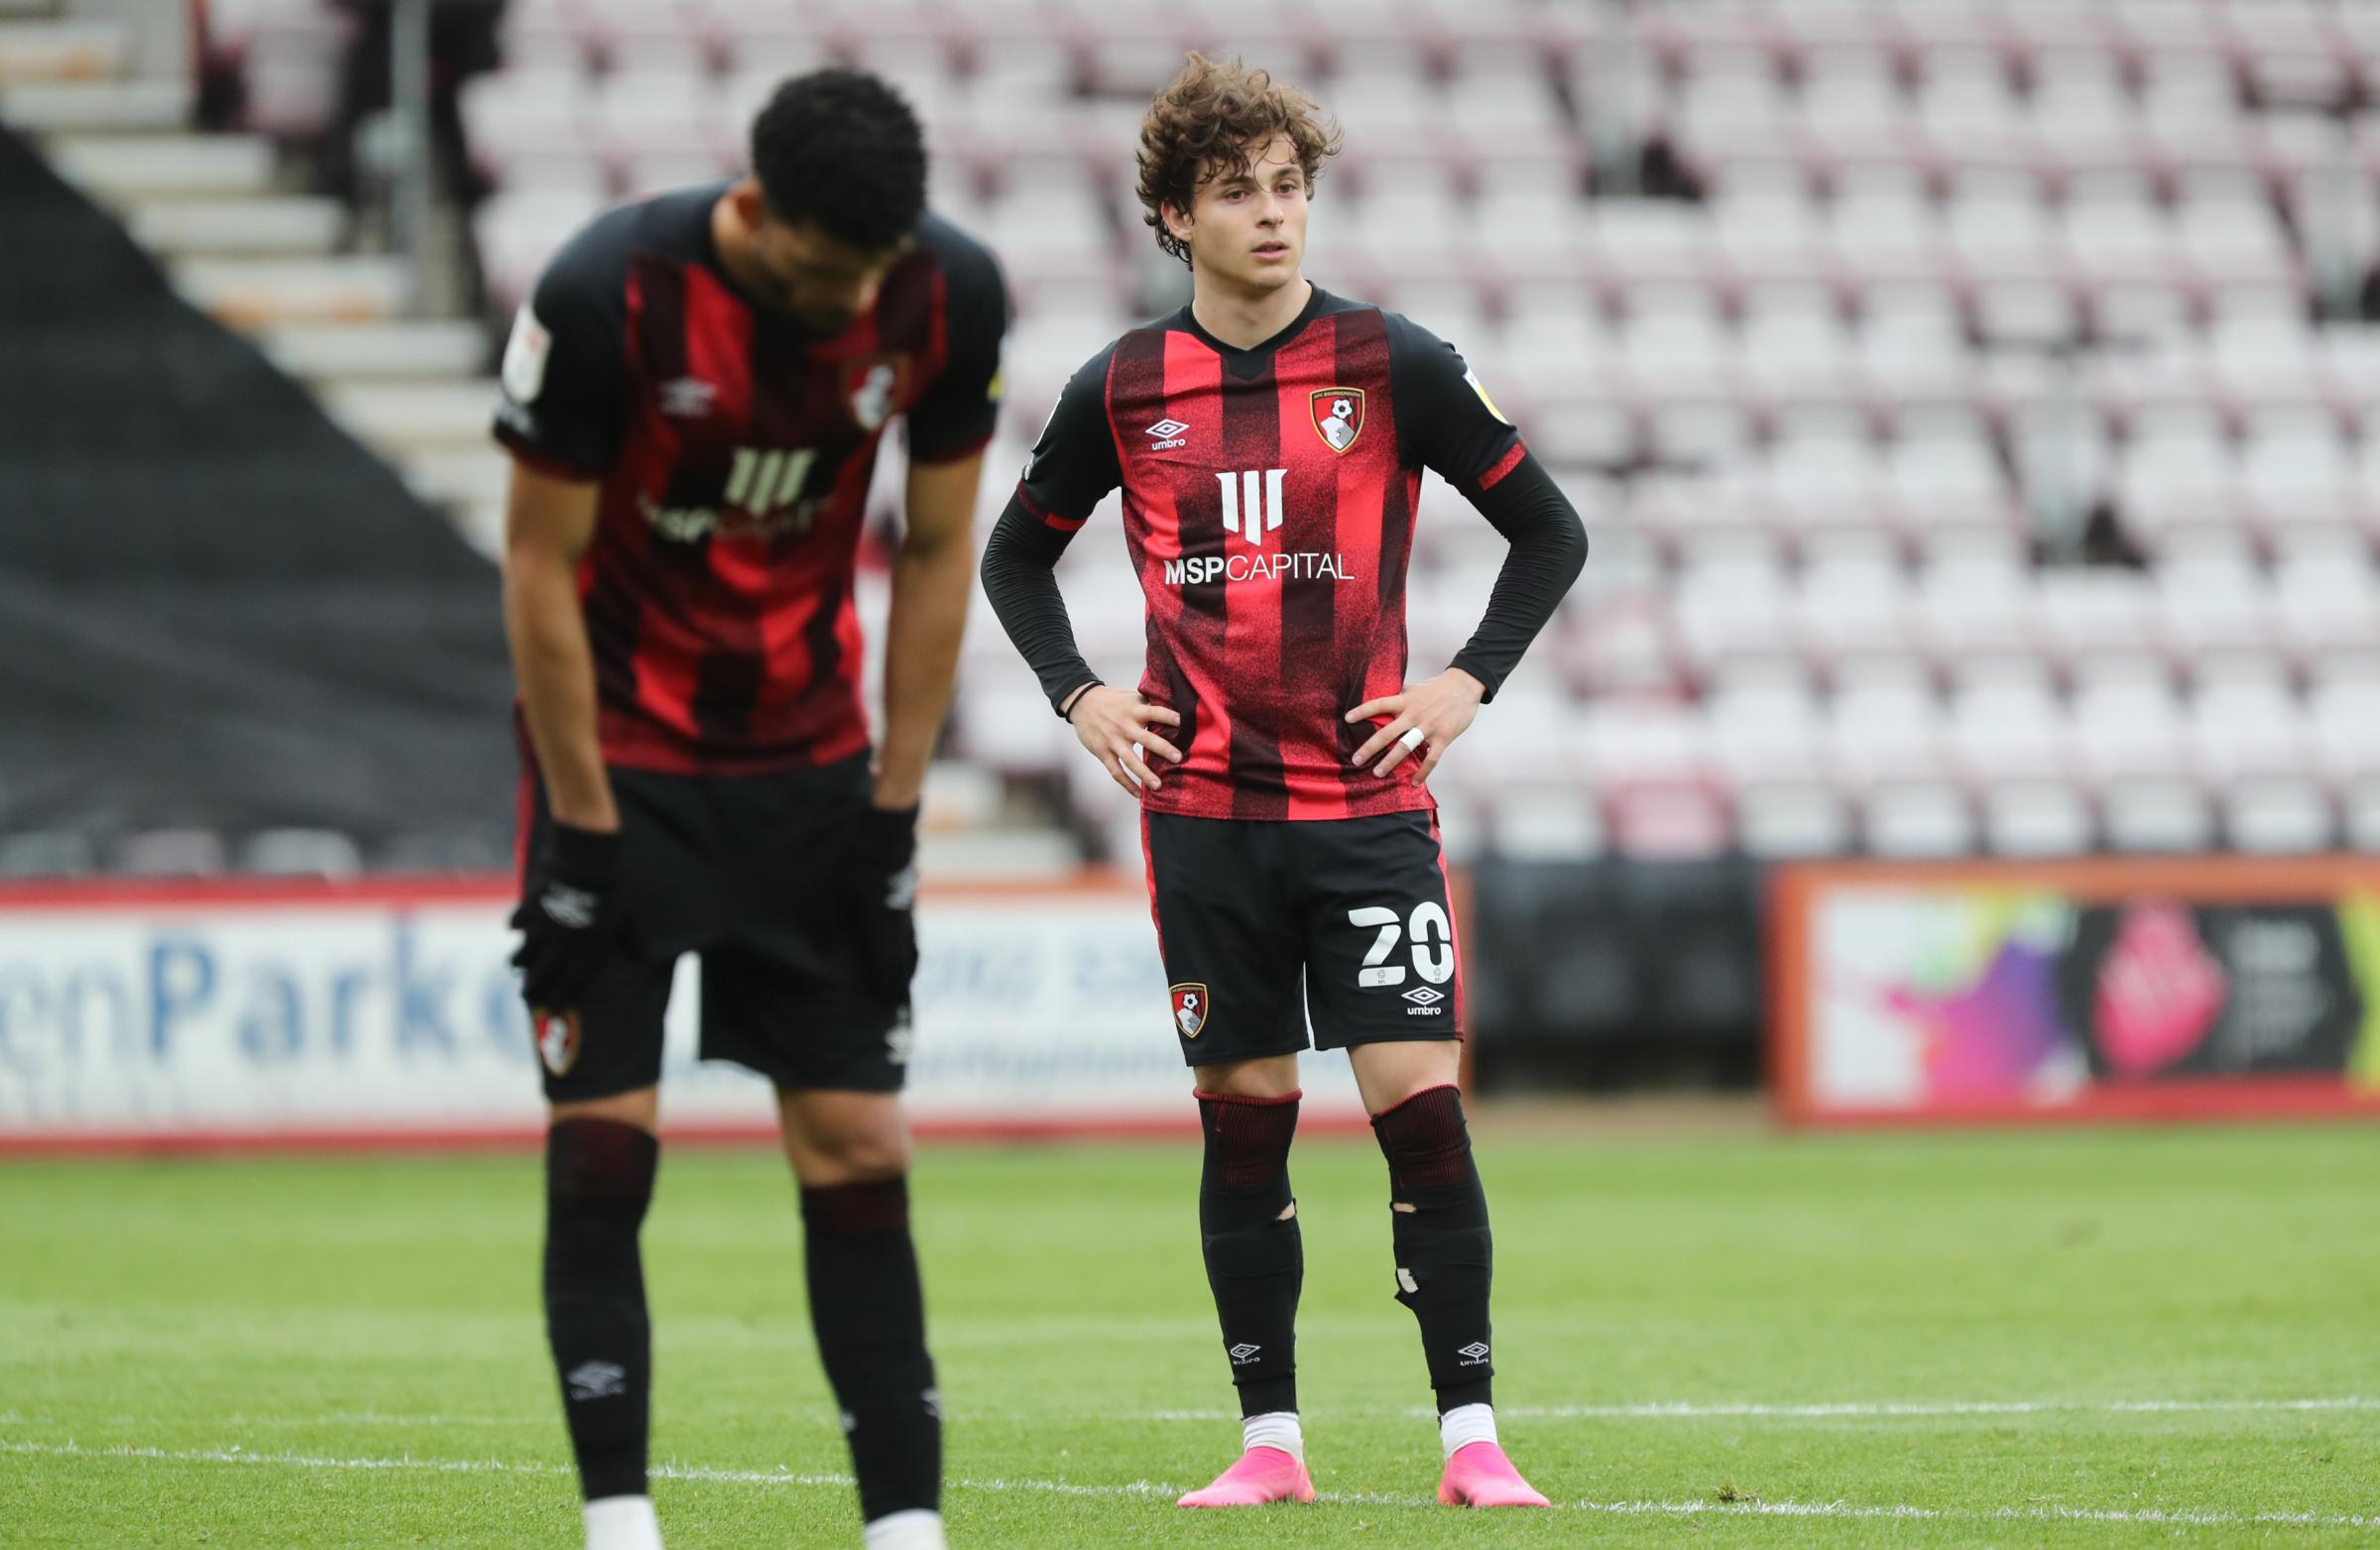 'You go out to Bournemouth and get a reality check' - Riquelme on Cherries stint